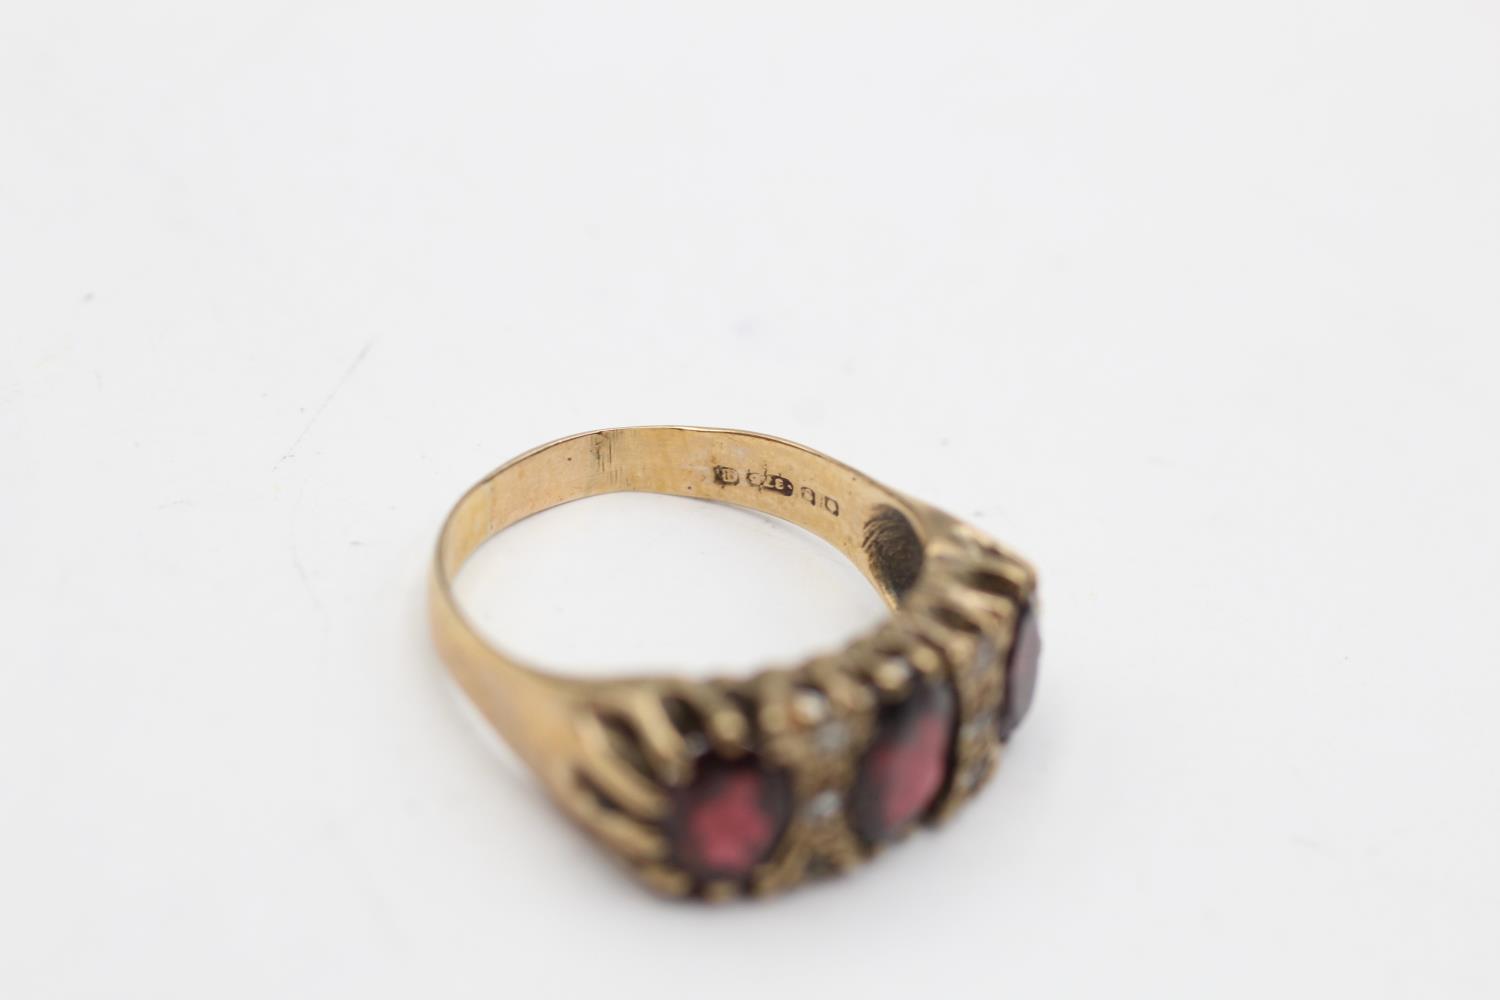 9ct gold vintage garnet & clear gemstone buttercup setting dress ring (4.6g) Size Q - Image 5 of 5